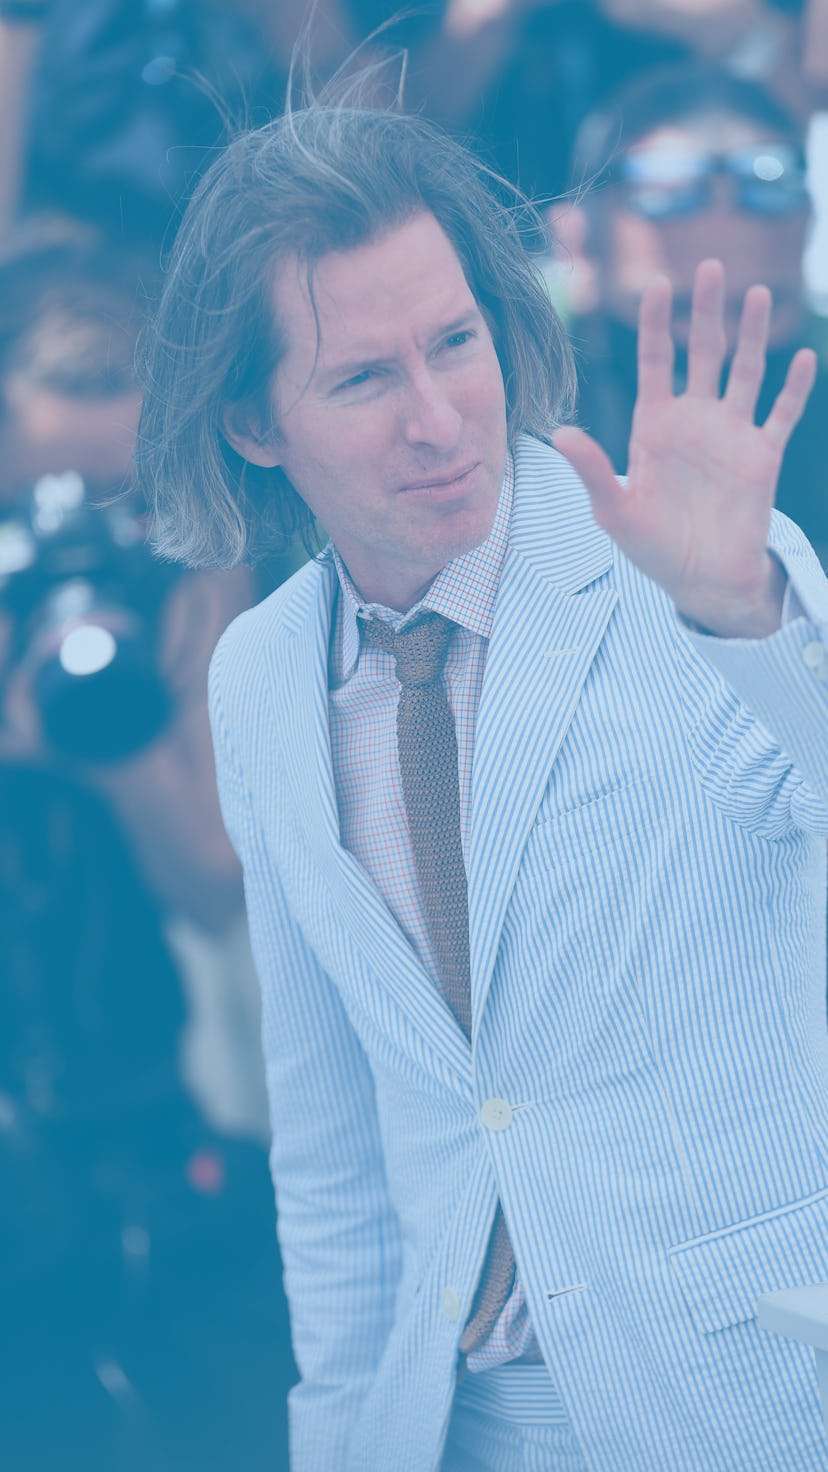 Wes Anderson at Cannes 2021.